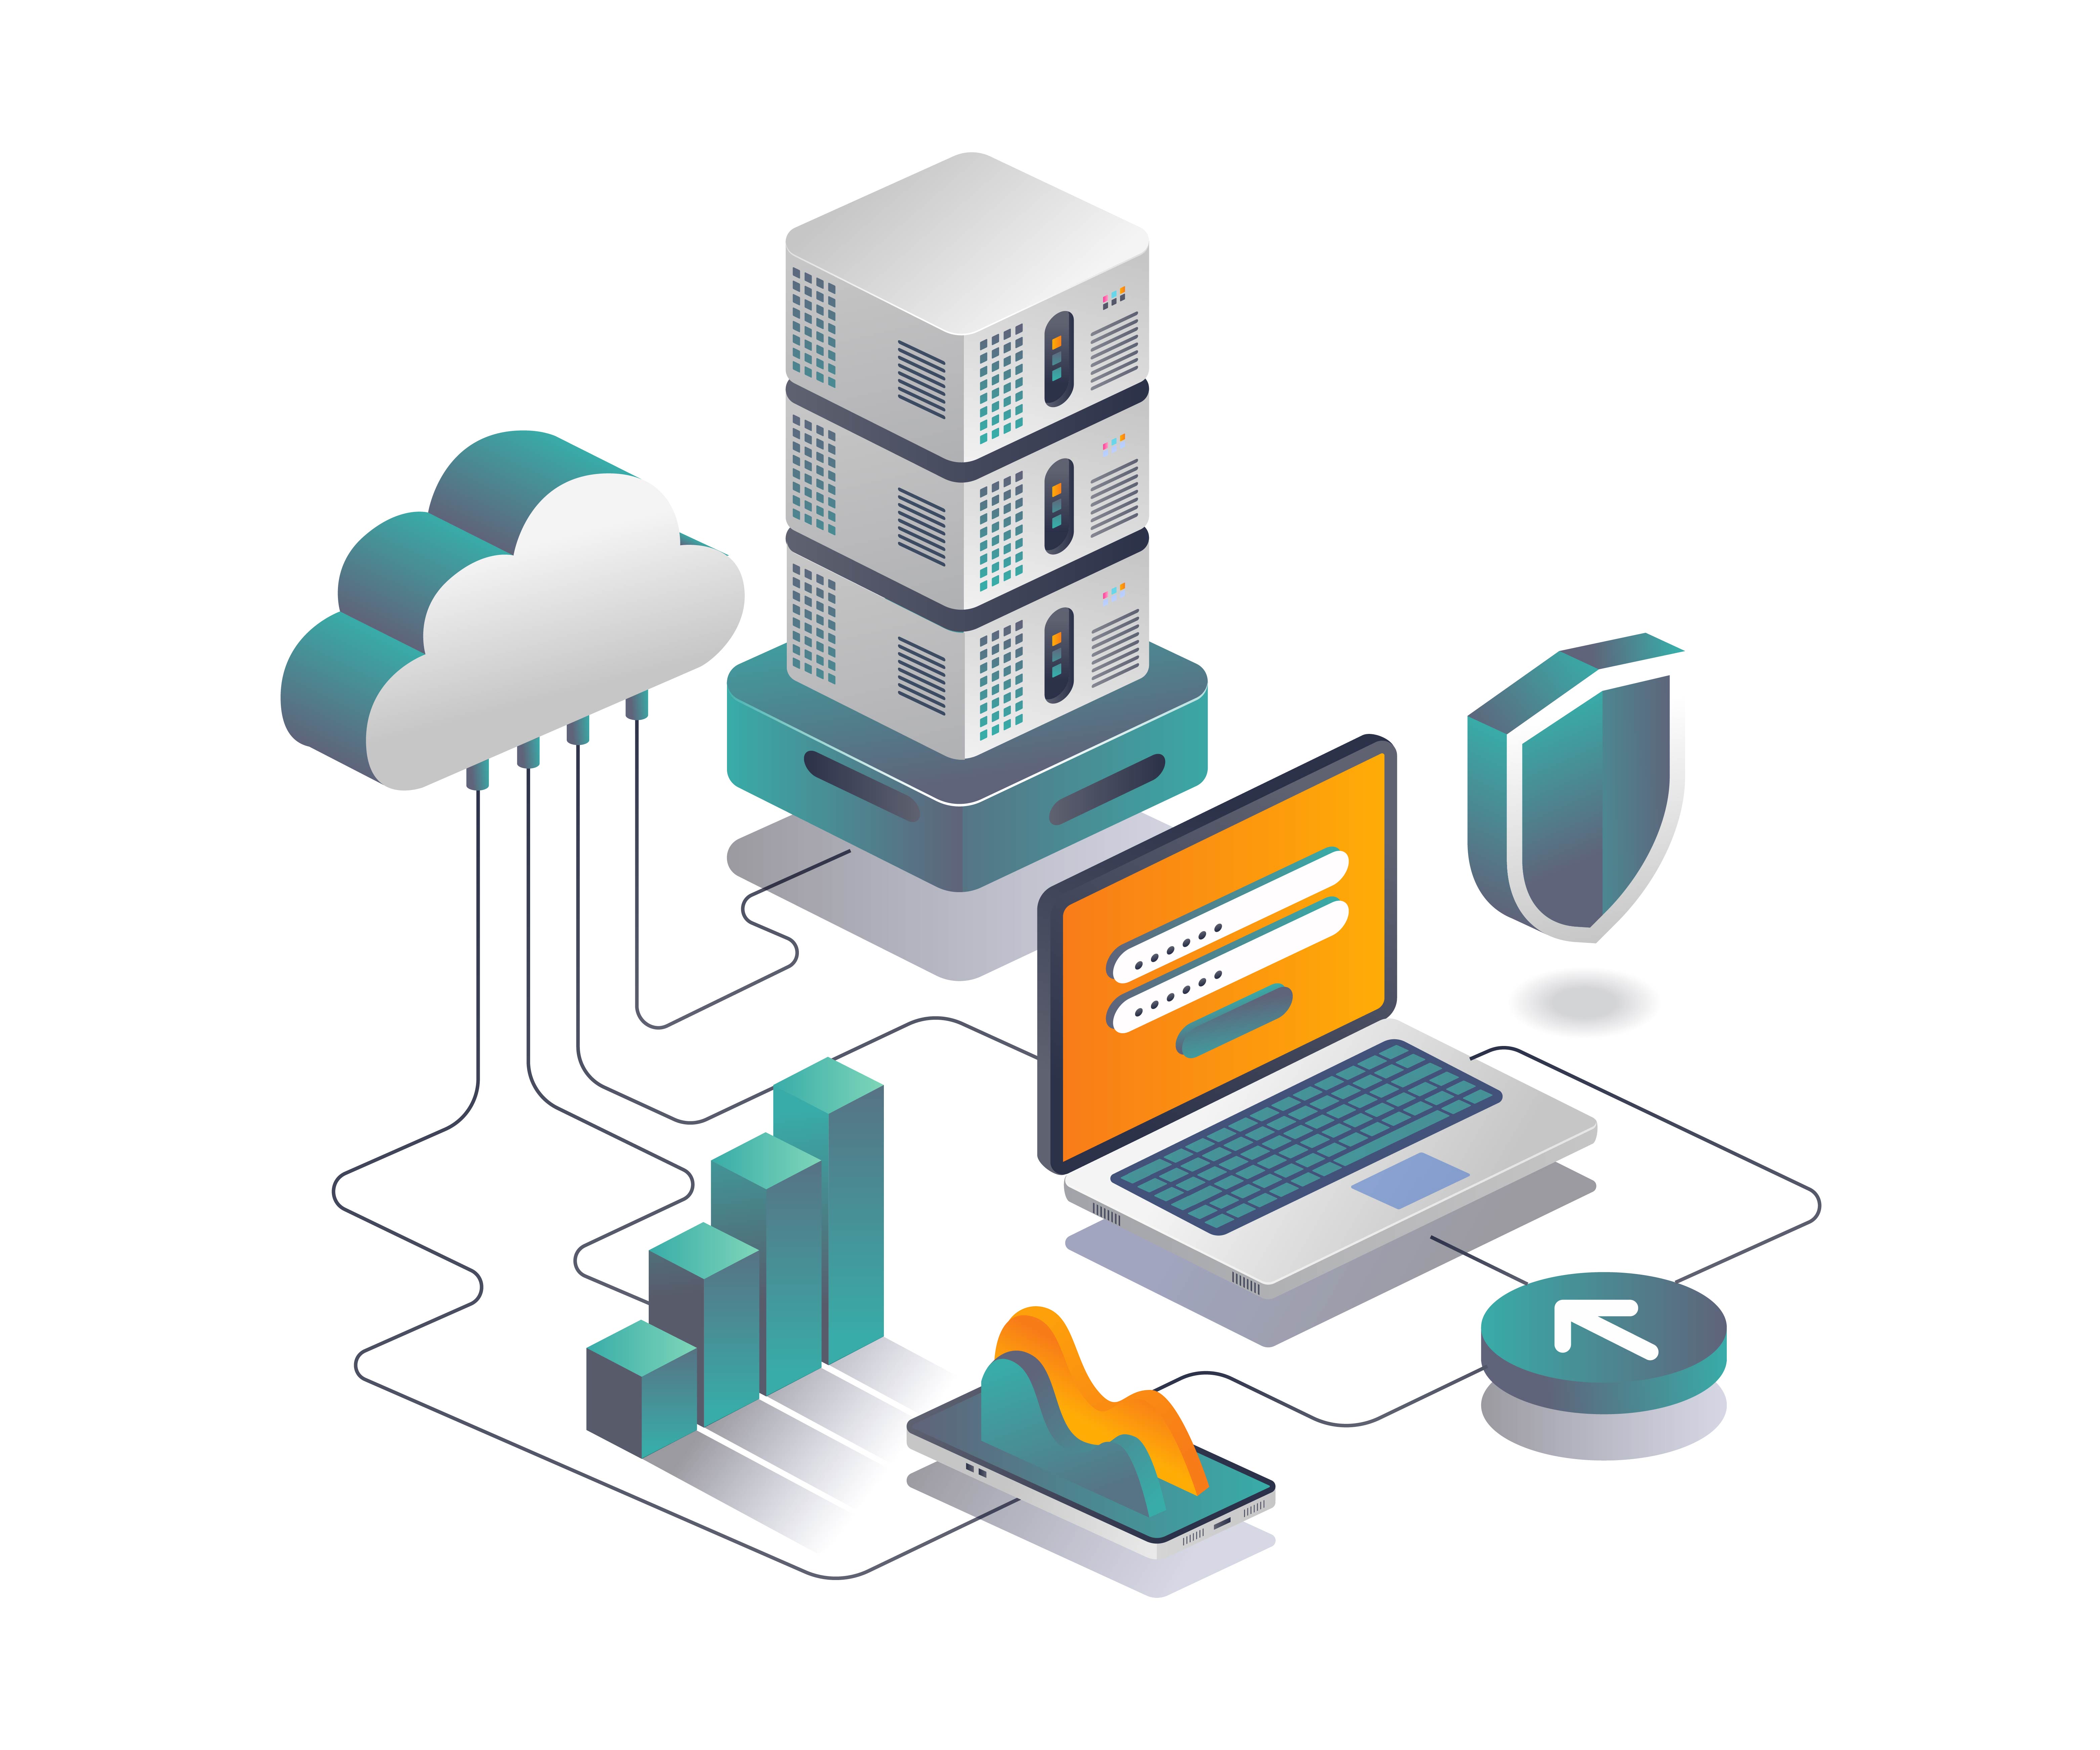 Cloud server data security analysis in isometric design